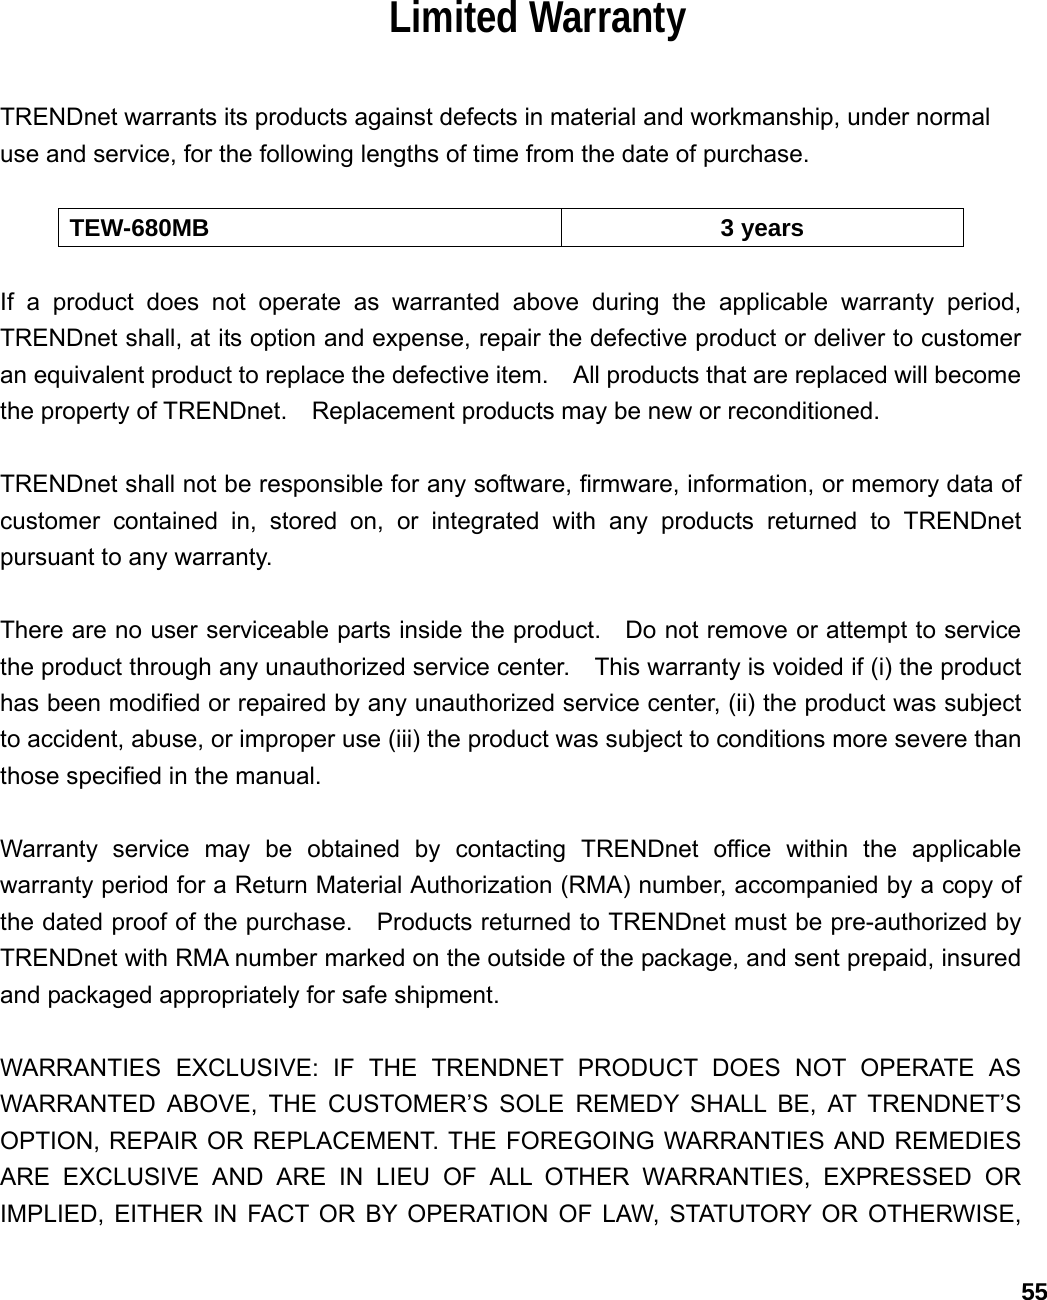                             55Limited Warranty  TRENDnet warrants its products against defects in material and workmanship, under normal use and service, for the following lengths of time from the date of purchase.      TEW-680MB 3 years  If a product does not operate as warranted above during the applicable warranty period, TRENDnet shall, at its option and expense, repair the defective product or deliver to customer an equivalent product to replace the defective item.    All products that are replaced will become the property of TRENDnet.    Replacement products may be new or reconditioned.  TRENDnet shall not be responsible for any software, firmware, information, or memory data of customer contained in, stored on, or integrated with any products returned to TRENDnet pursuant to any warranty.  There are no user serviceable parts inside the product.    Do not remove or attempt to service the product through any unauthorized service center.    This warranty is voided if (i) the product has been modified or repaired by any unauthorized service center, (ii) the product was subject to accident, abuse, or improper use (iii) the product was subject to conditions more severe than those specified in the manual.  Warranty service may be obtained by contacting TRENDnet office within the applicable warranty period for a Return Material Authorization (RMA) number, accompanied by a copy of the dated proof of the purchase.    Products returned to TRENDnet must be pre-authorized by TRENDnet with RMA number marked on the outside of the package, and sent prepaid, insured and packaged appropriately for safe shipment.      WARRANTIES EXCLUSIVE: IF THE TRENDNET PRODUCT DOES NOT OPERATE AS WARRANTED ABOVE, THE CUSTOMER’S SOLE REMEDY SHALL BE, AT TRENDNET’S OPTION, REPAIR OR REPLACEMENT. THE FOREGOING WARRANTIES AND REMEDIES ARE EXCLUSIVE AND ARE IN LIEU OF ALL OTHER WARRANTIES, EXPRESSED OR IMPLIED, EITHER IN FACT OR BY OPERATION OF LAW, STATUTORY OR OTHERWISE, 